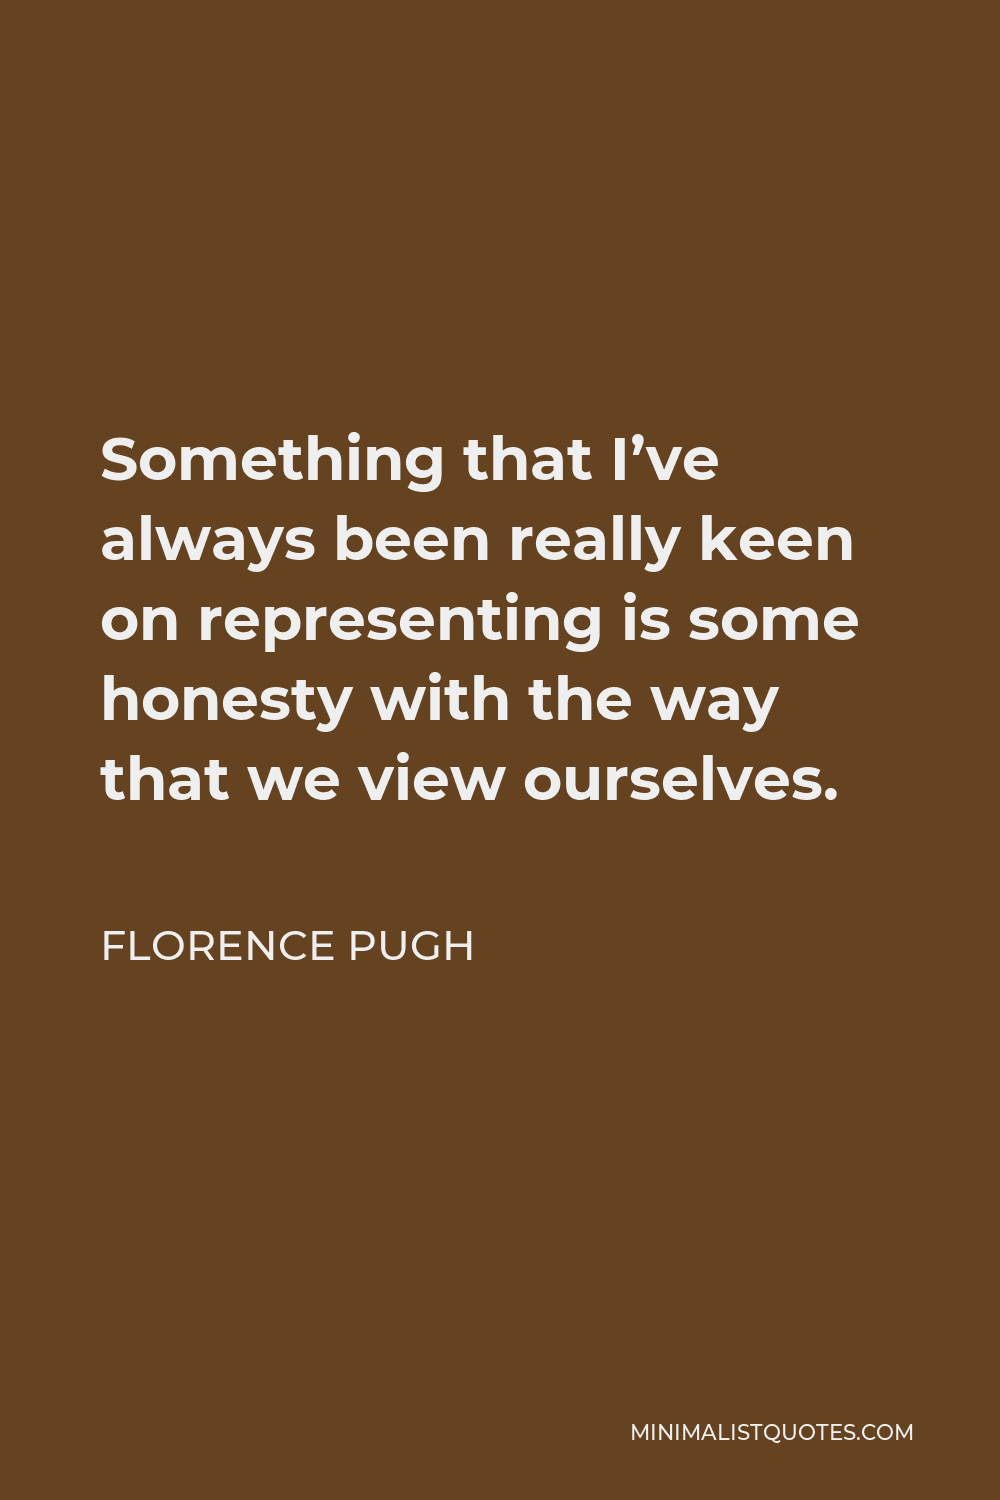 Florence Pugh Quote - Something that I’ve always been really keen on representing is some honesty with the way that we view ourselves.